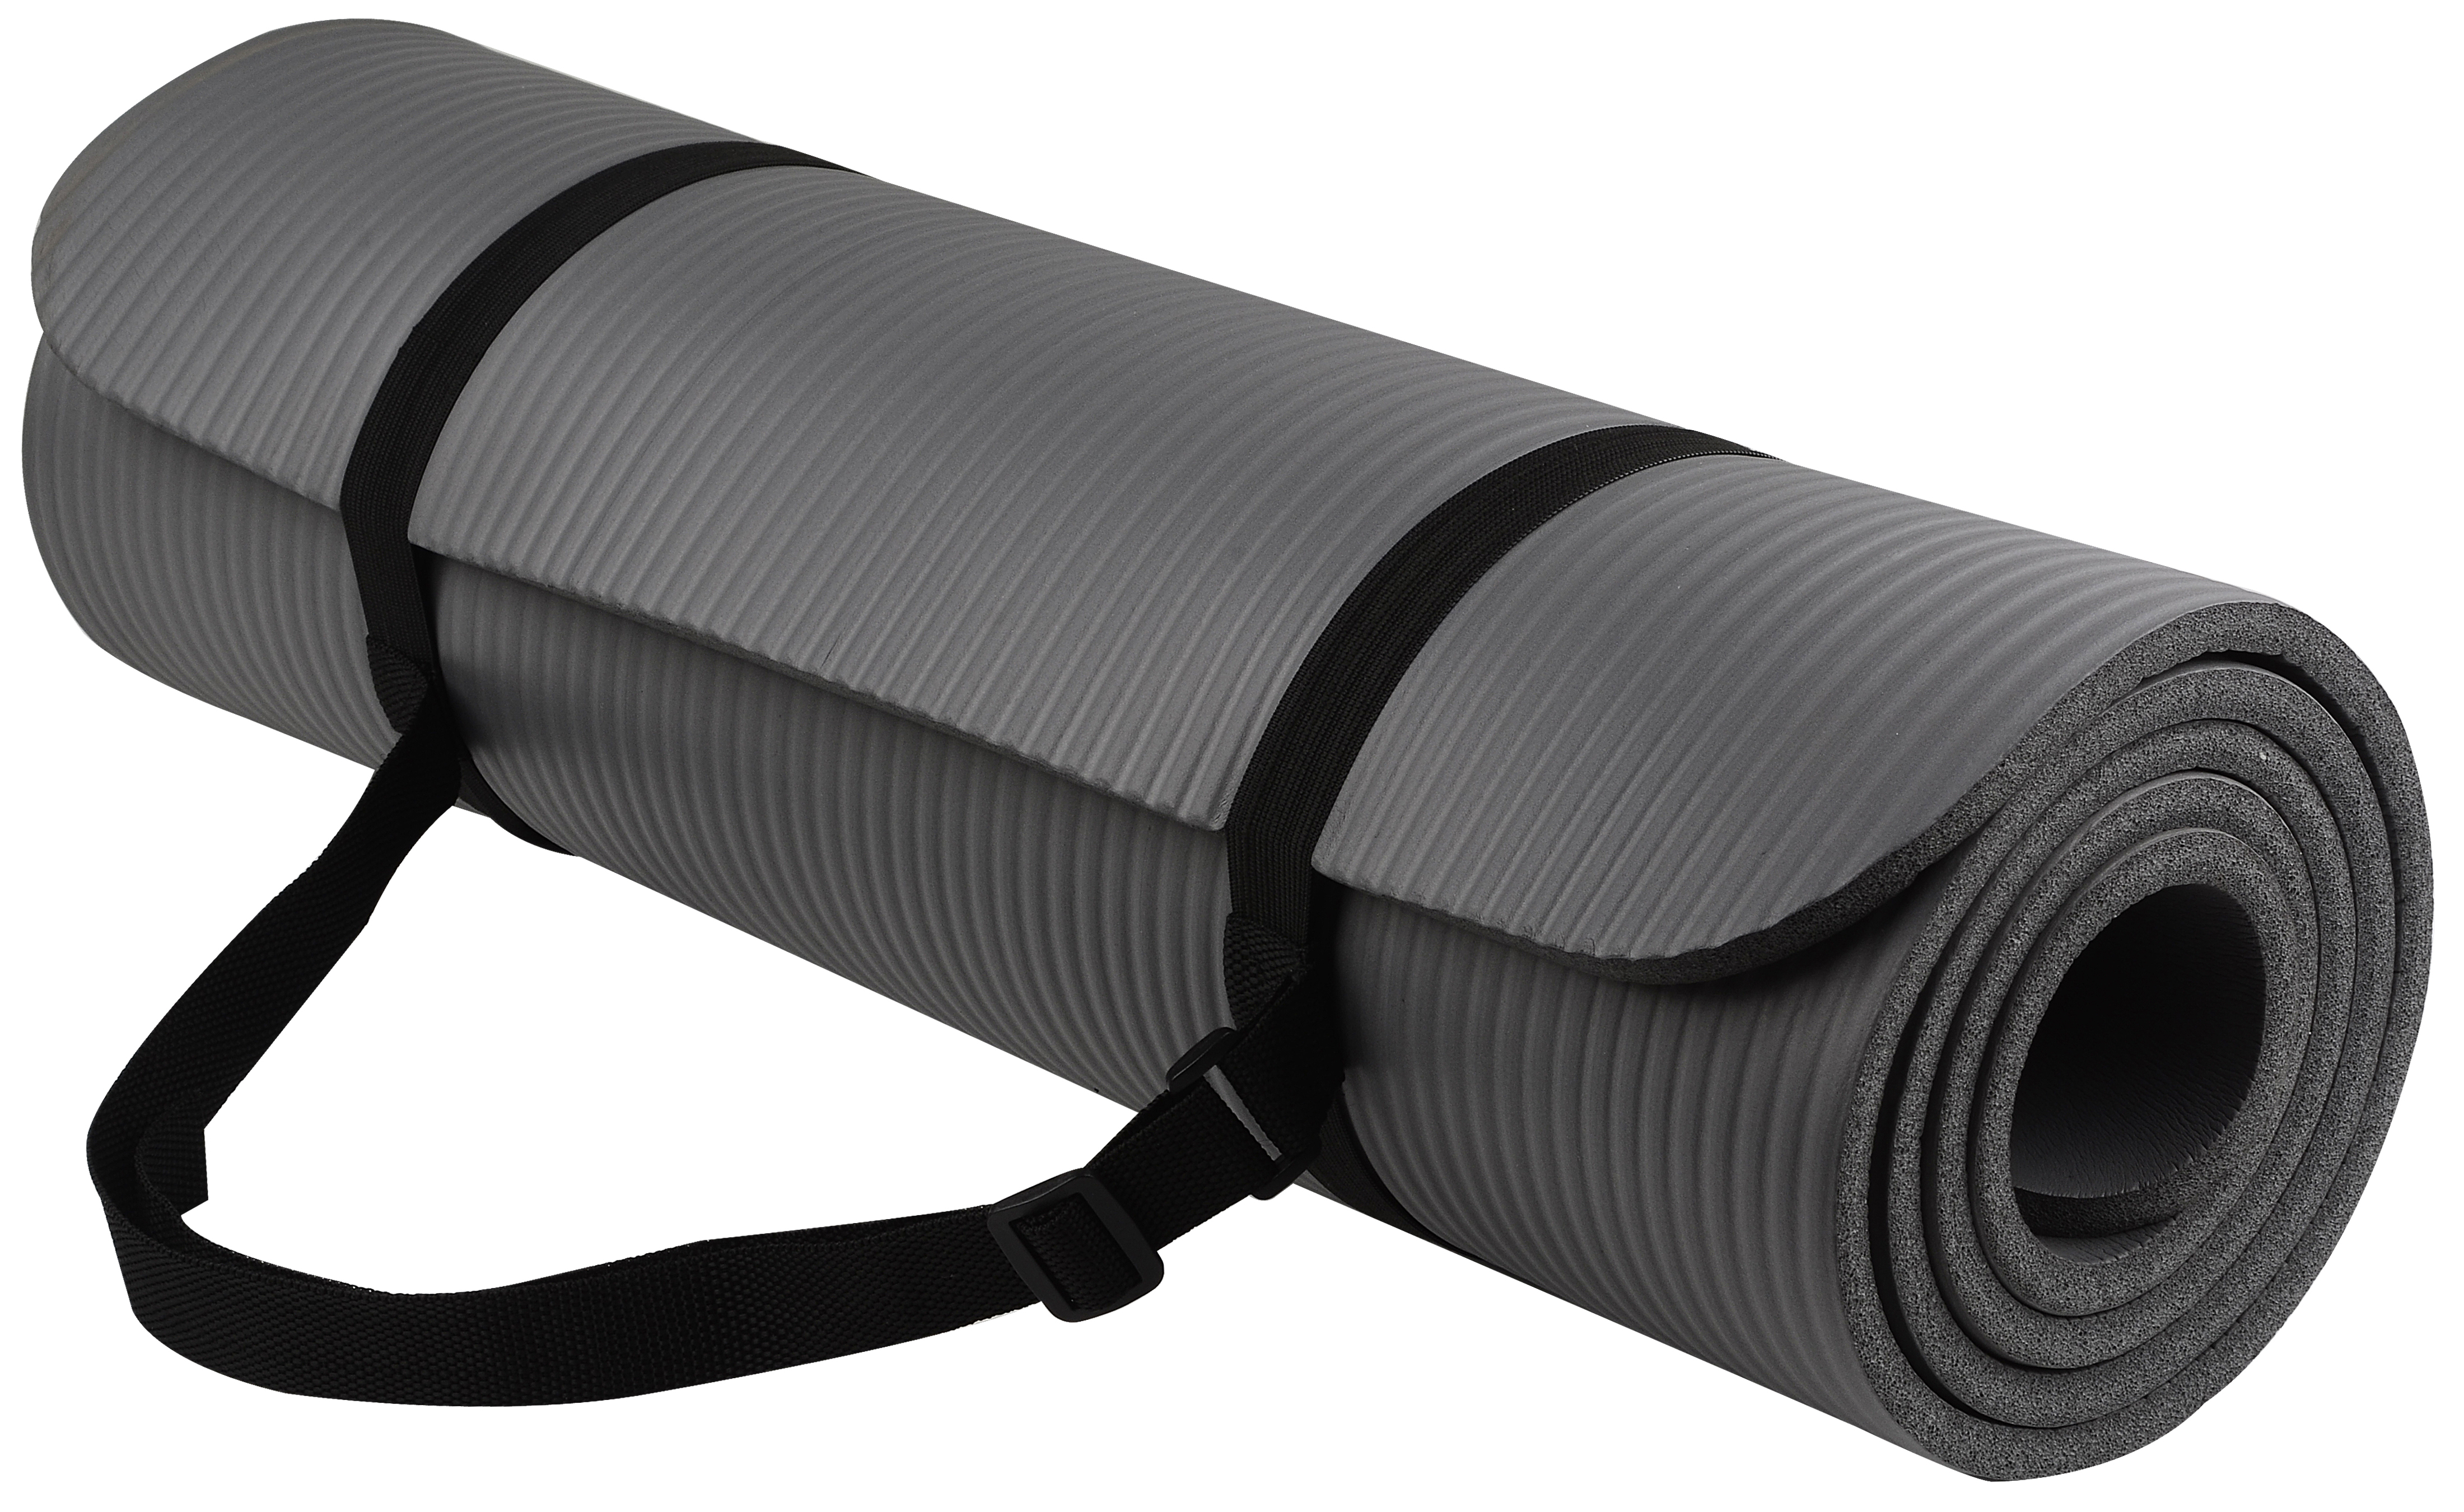 BalanceFrom All-Purpose 1/2 In., High Density Foam Exercise Yoga Mat Anti-Tear with Carrying Strap, Gray - image 1 of 5